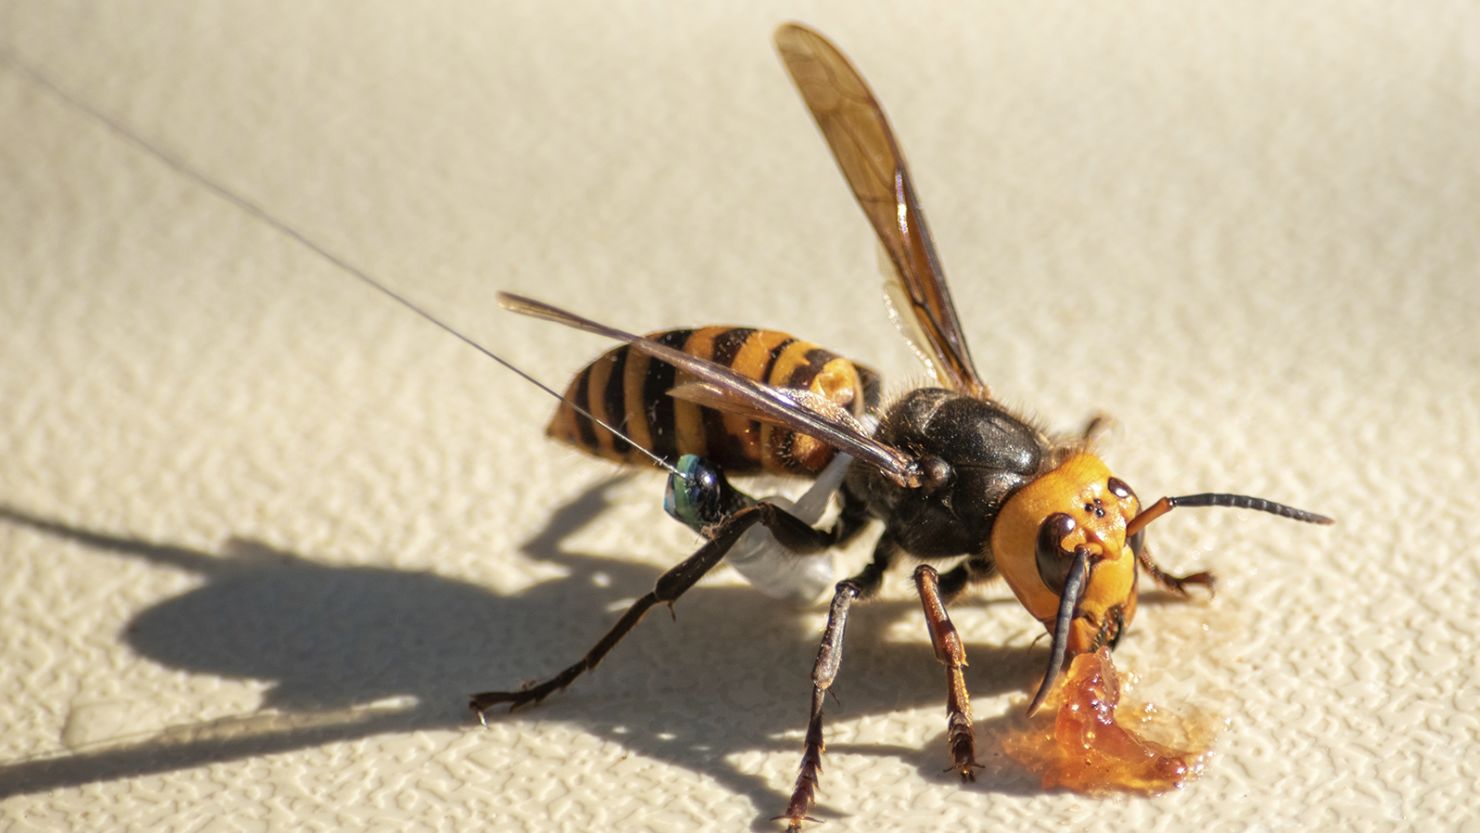 In photo provided by the Washington State Dept. of Agriculture, an Asian Giant Hornet wearing a tracking device is shown Thursday, Oct. 22, 2020 near Blaine, Wash. These hornets are known for attacking and destroying honeybee nests.